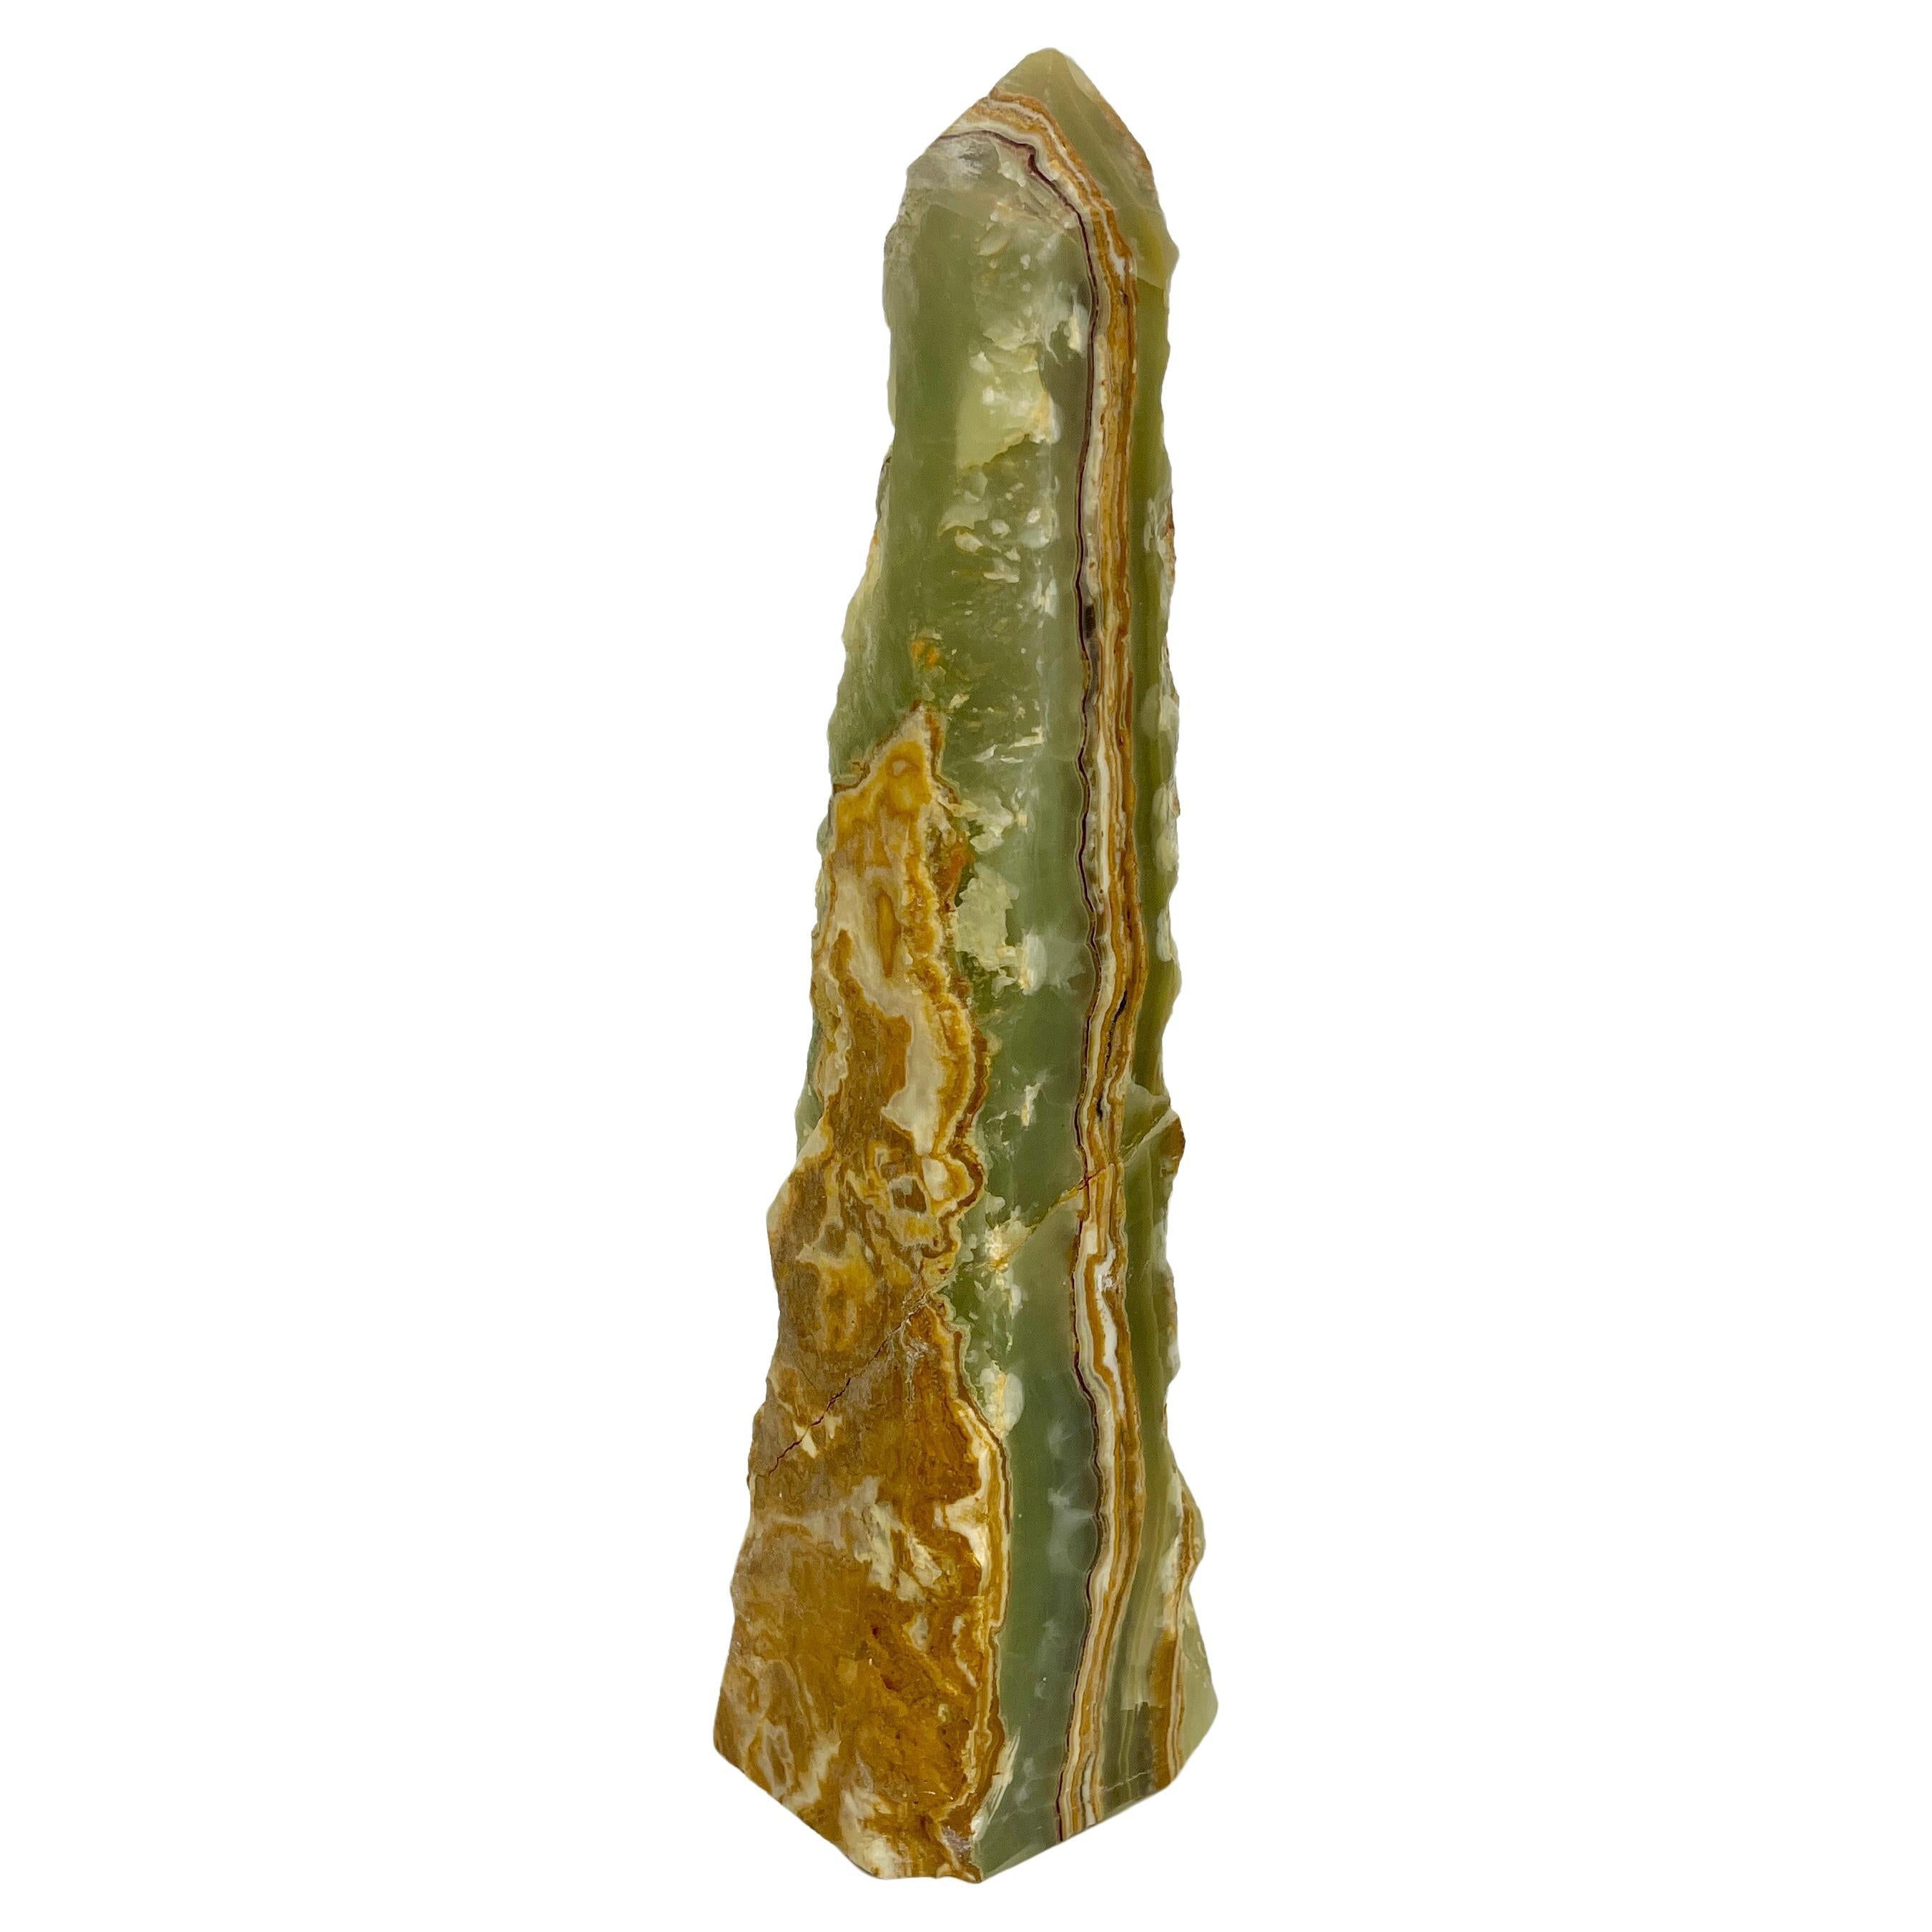 20th Century Green Onyx Obelisk With Natural Rough Edge Finish